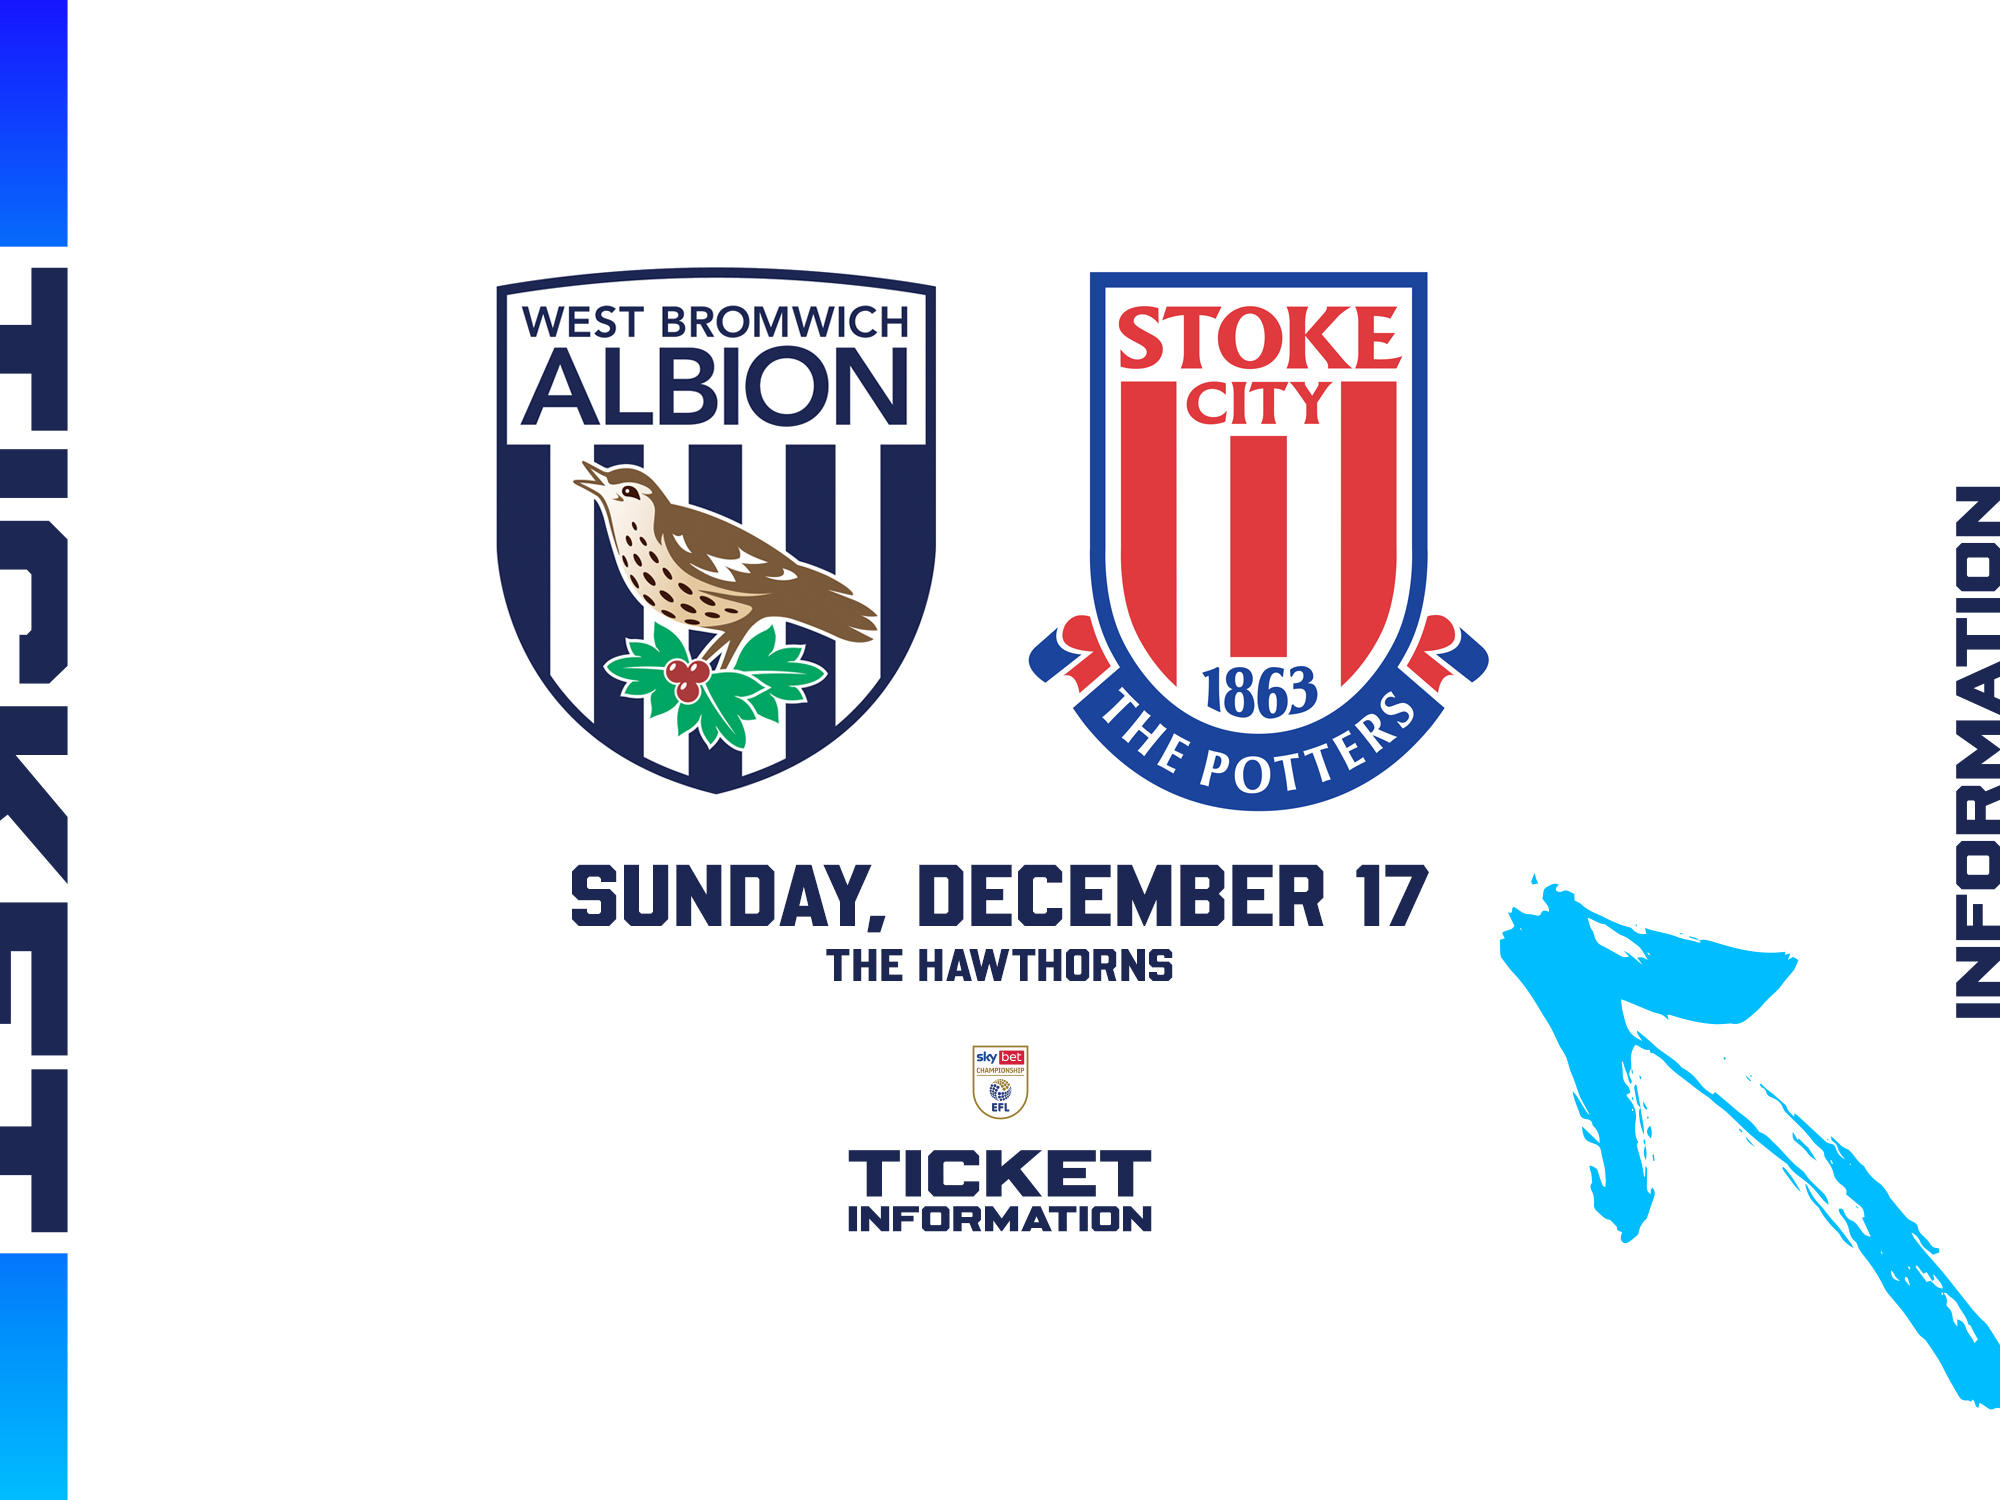 A ticket graphic displaying information for Albion's game against Stoke City